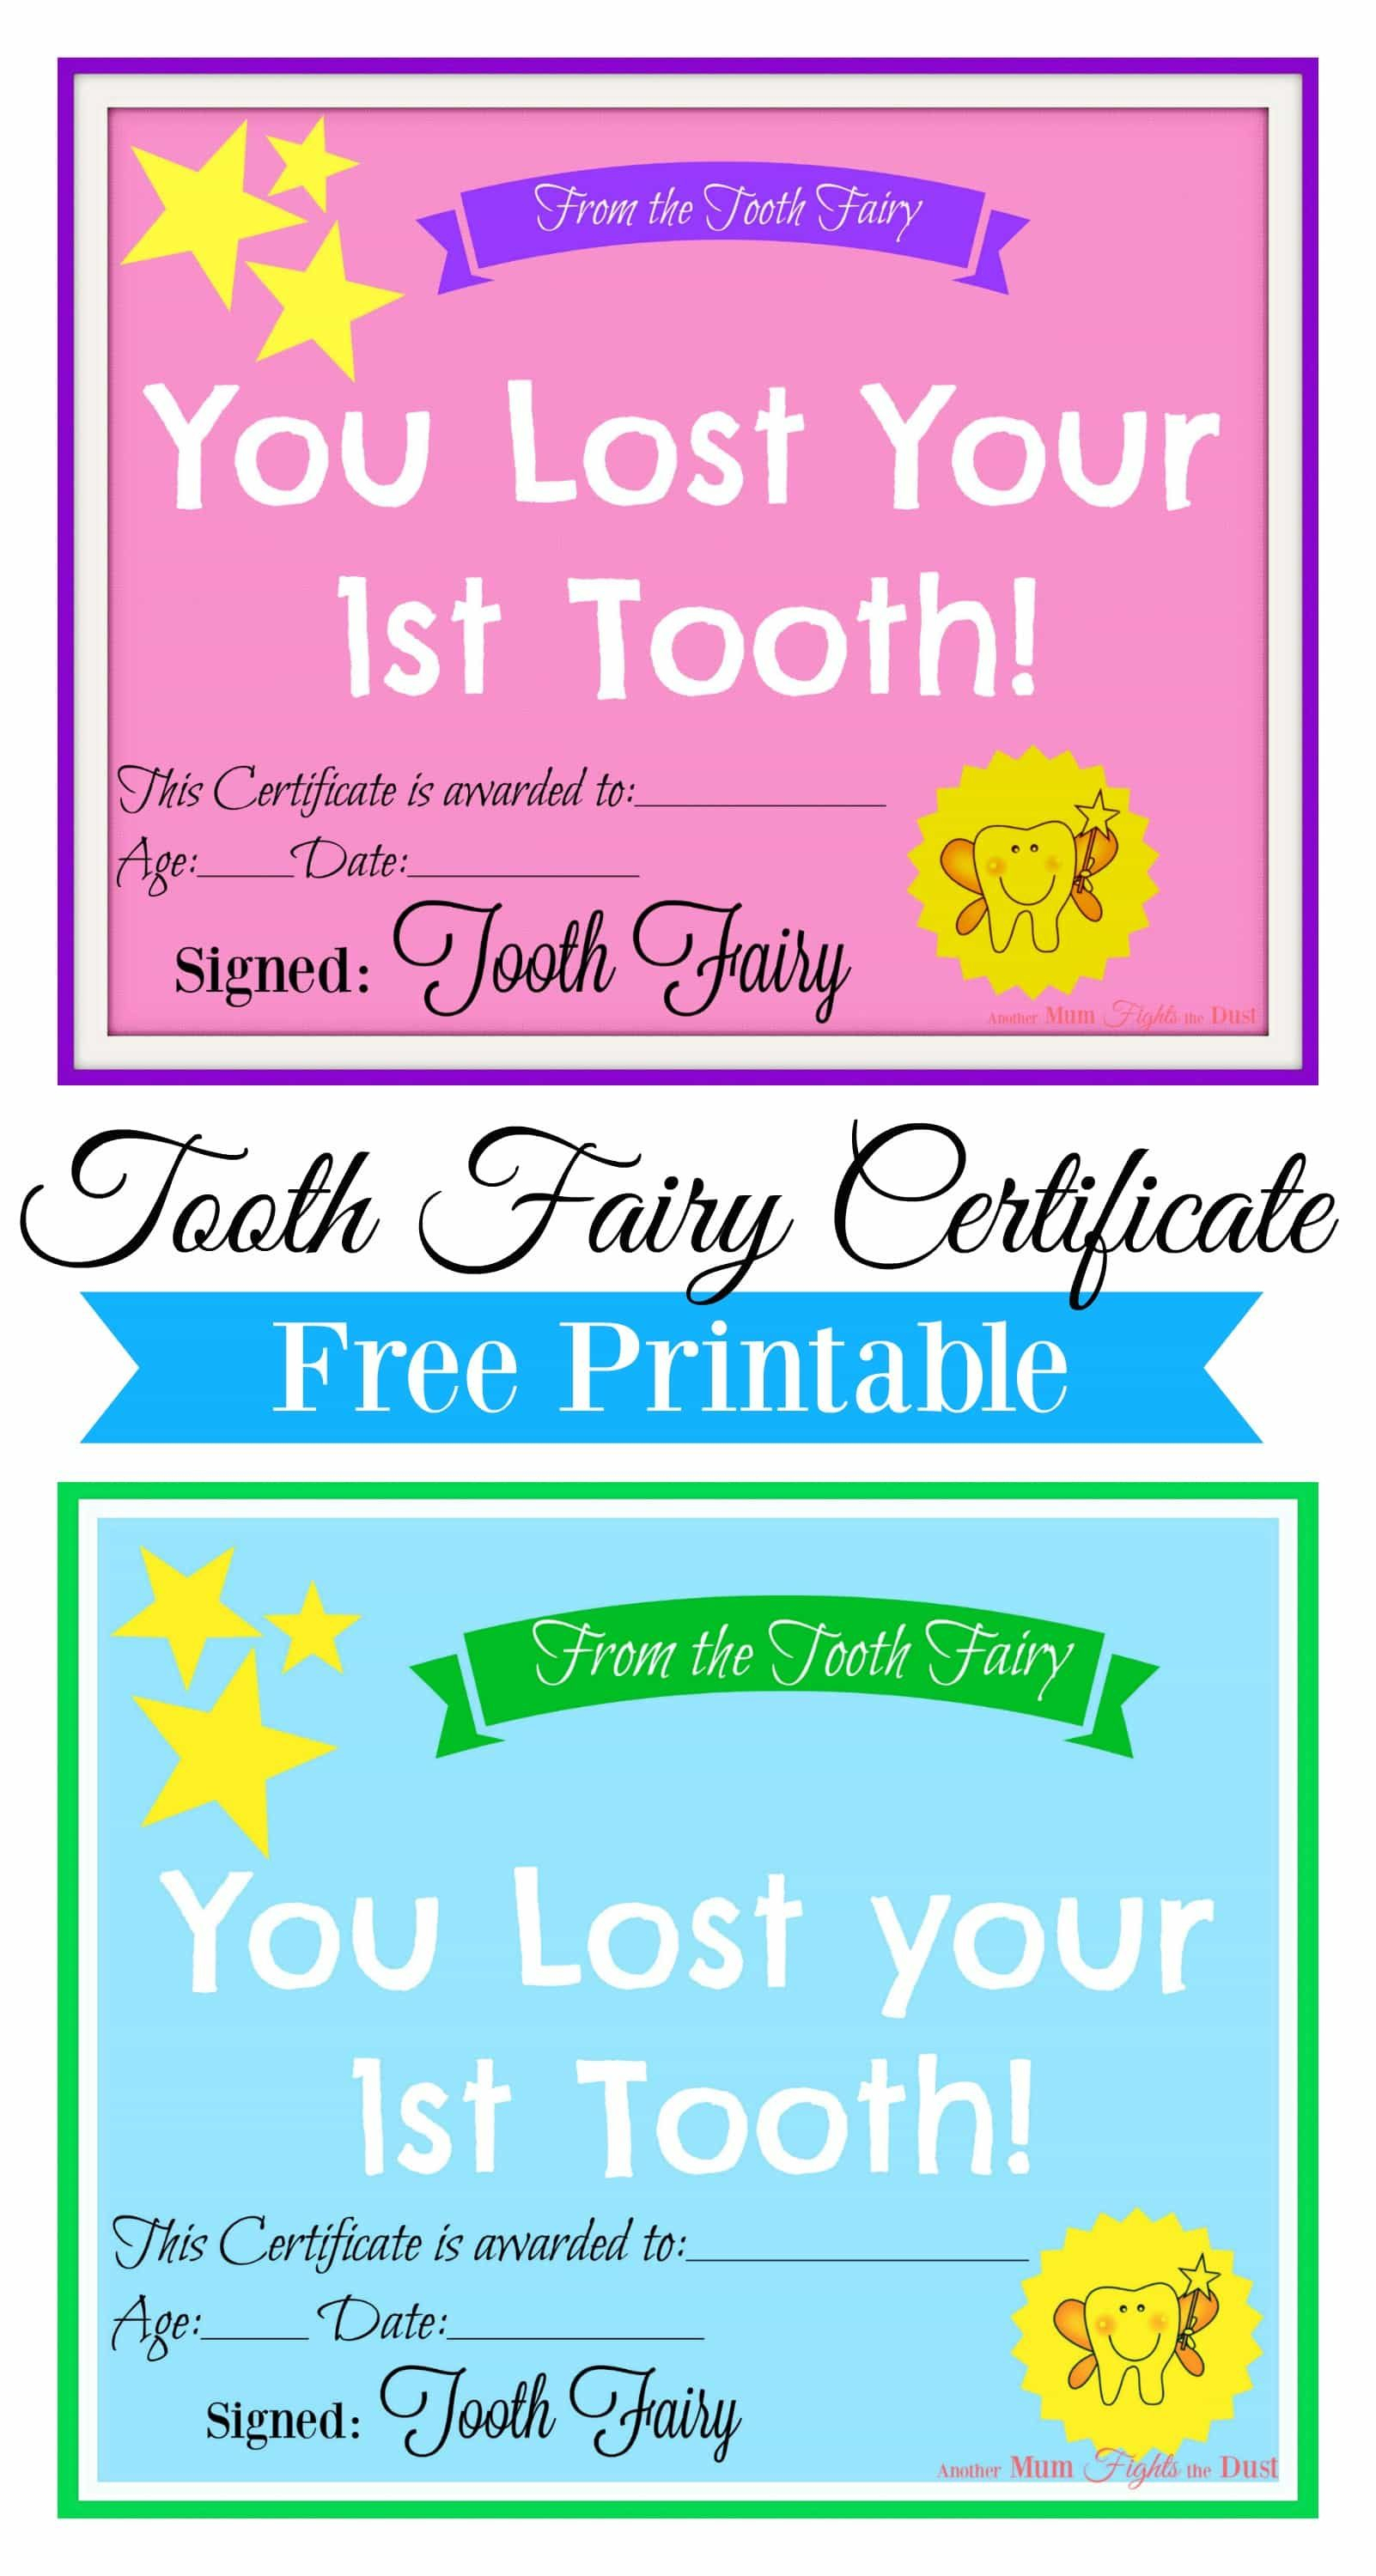 Free Printable Tooth Fairy Certificate | Tooth Fairy Ideas | Tooth - Tooth Fairy Stationery Free Printable